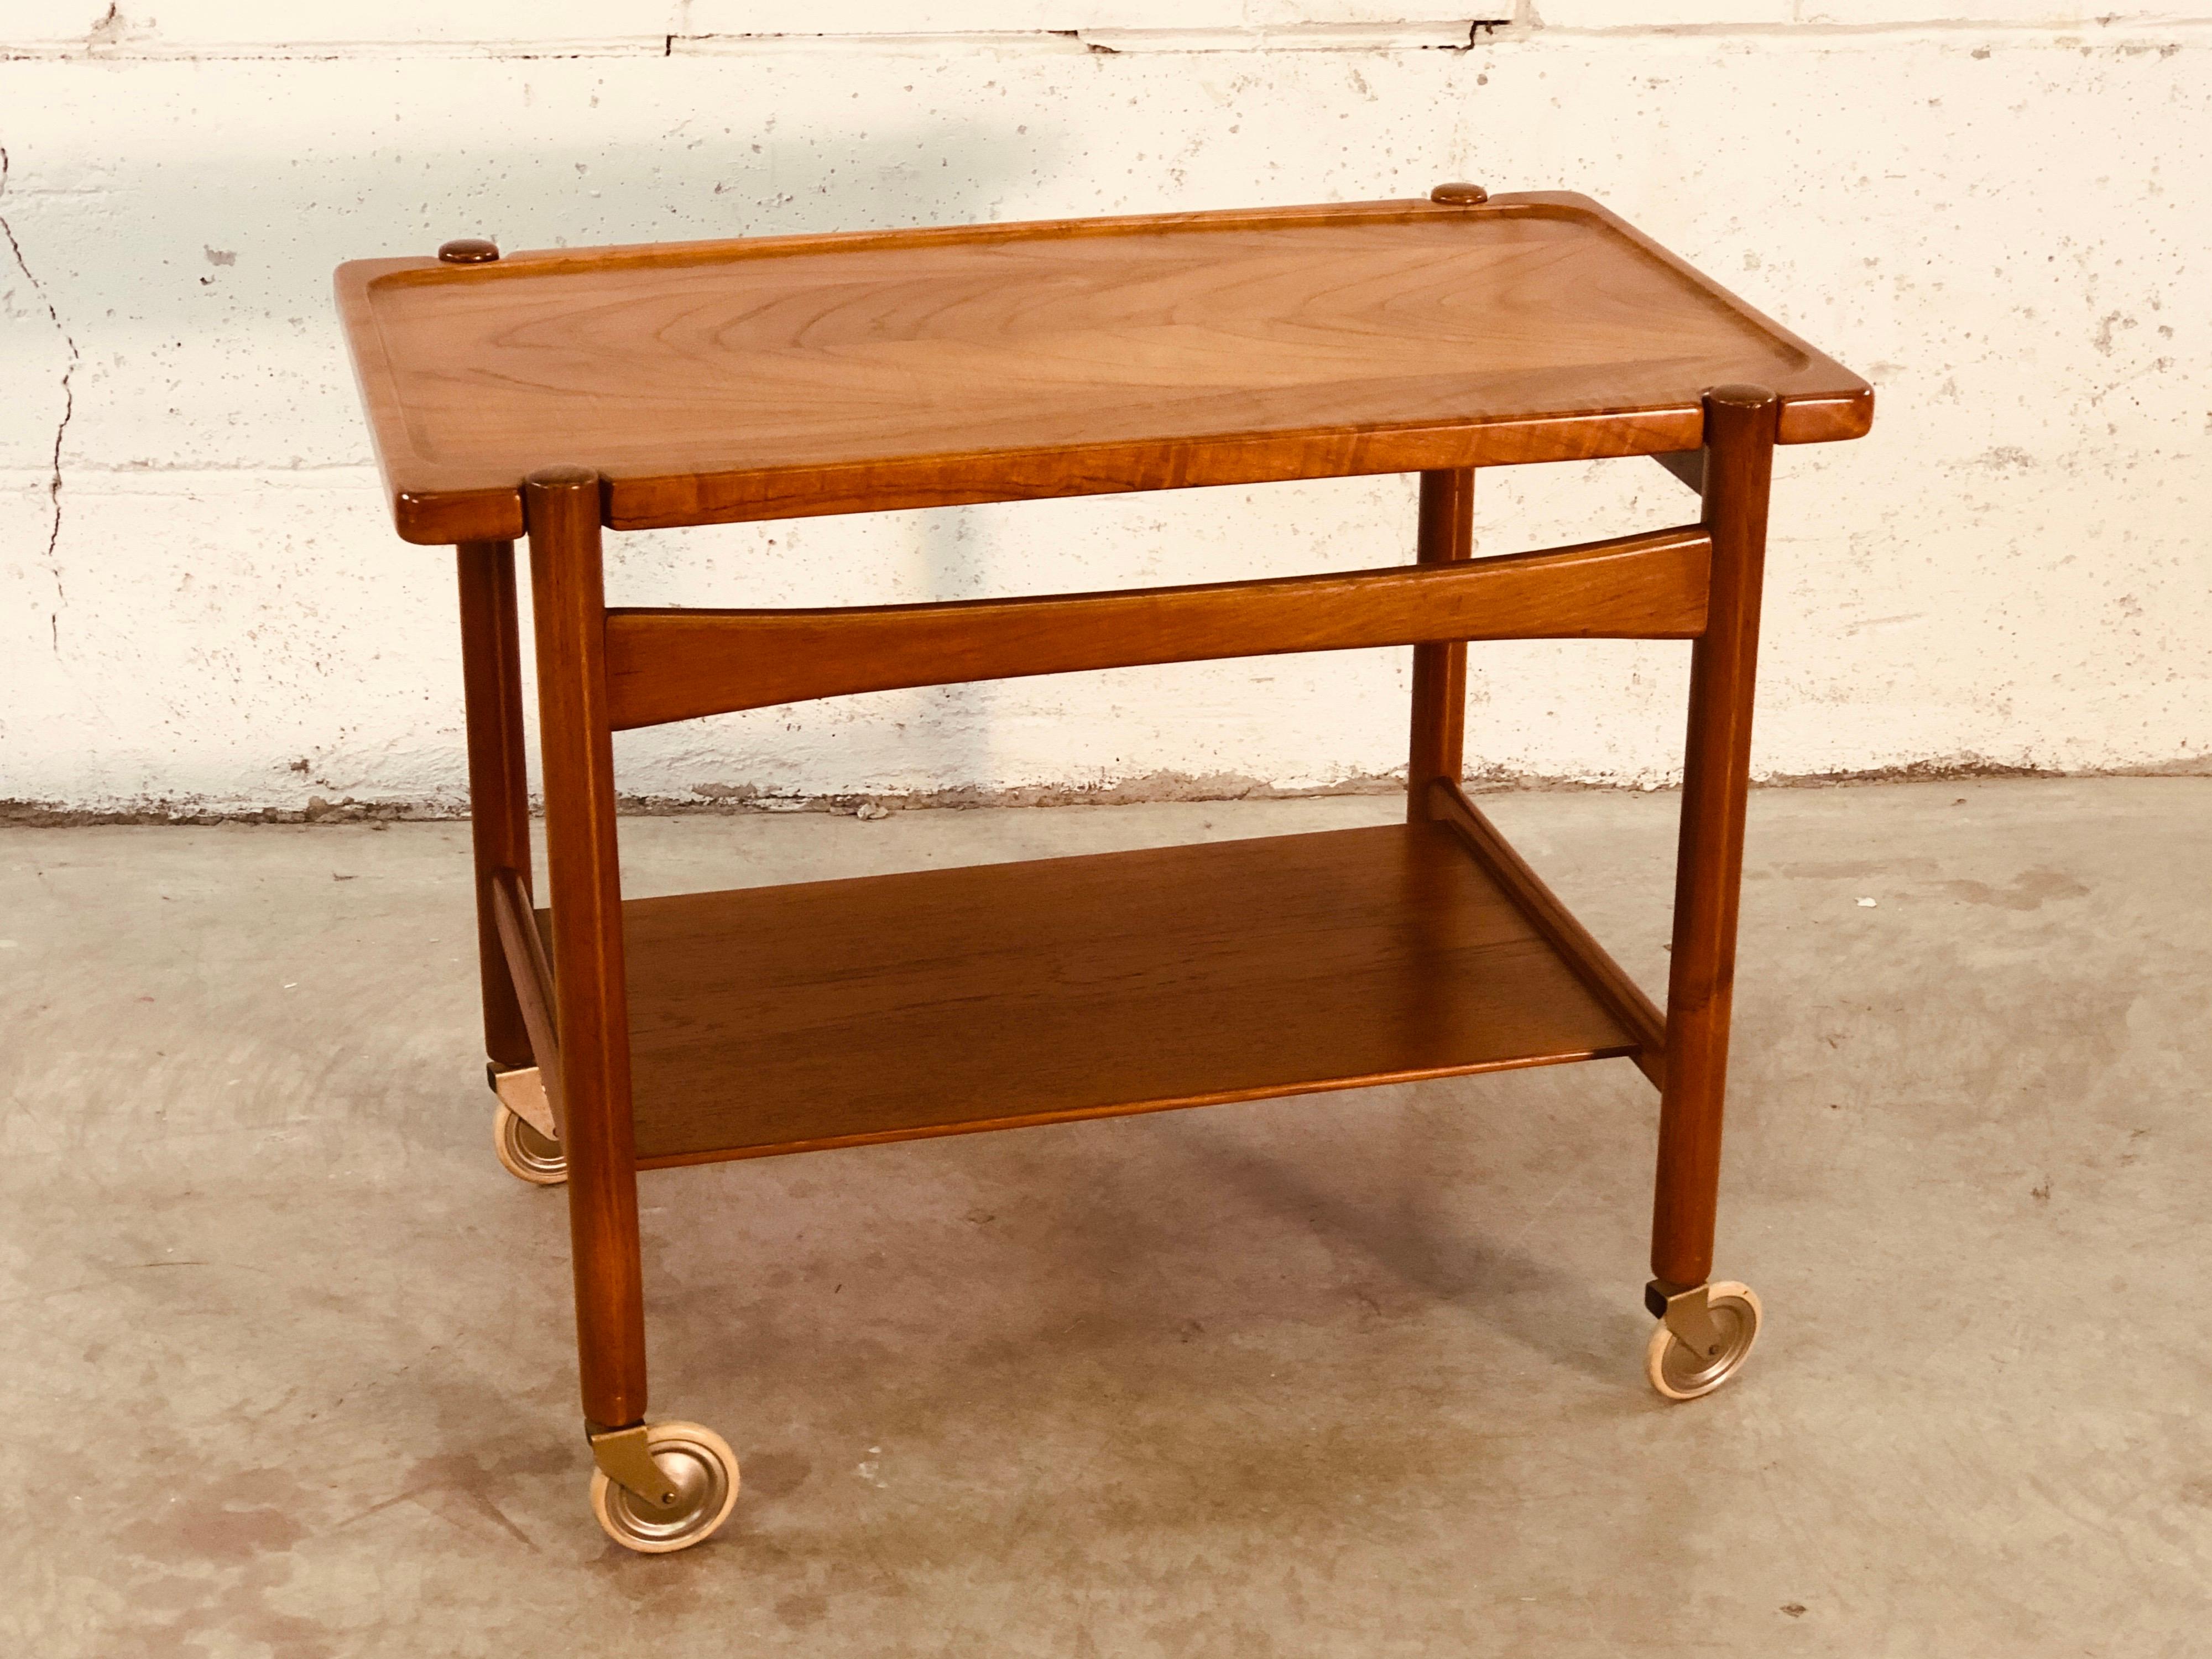 Vintage 1960s serving cart or trolley designed by Hans J. Wegner for Andreas Tuck in Denmark. The top of the cart is removable and the tray can be used to serve. Excellent condition. Fully marked.